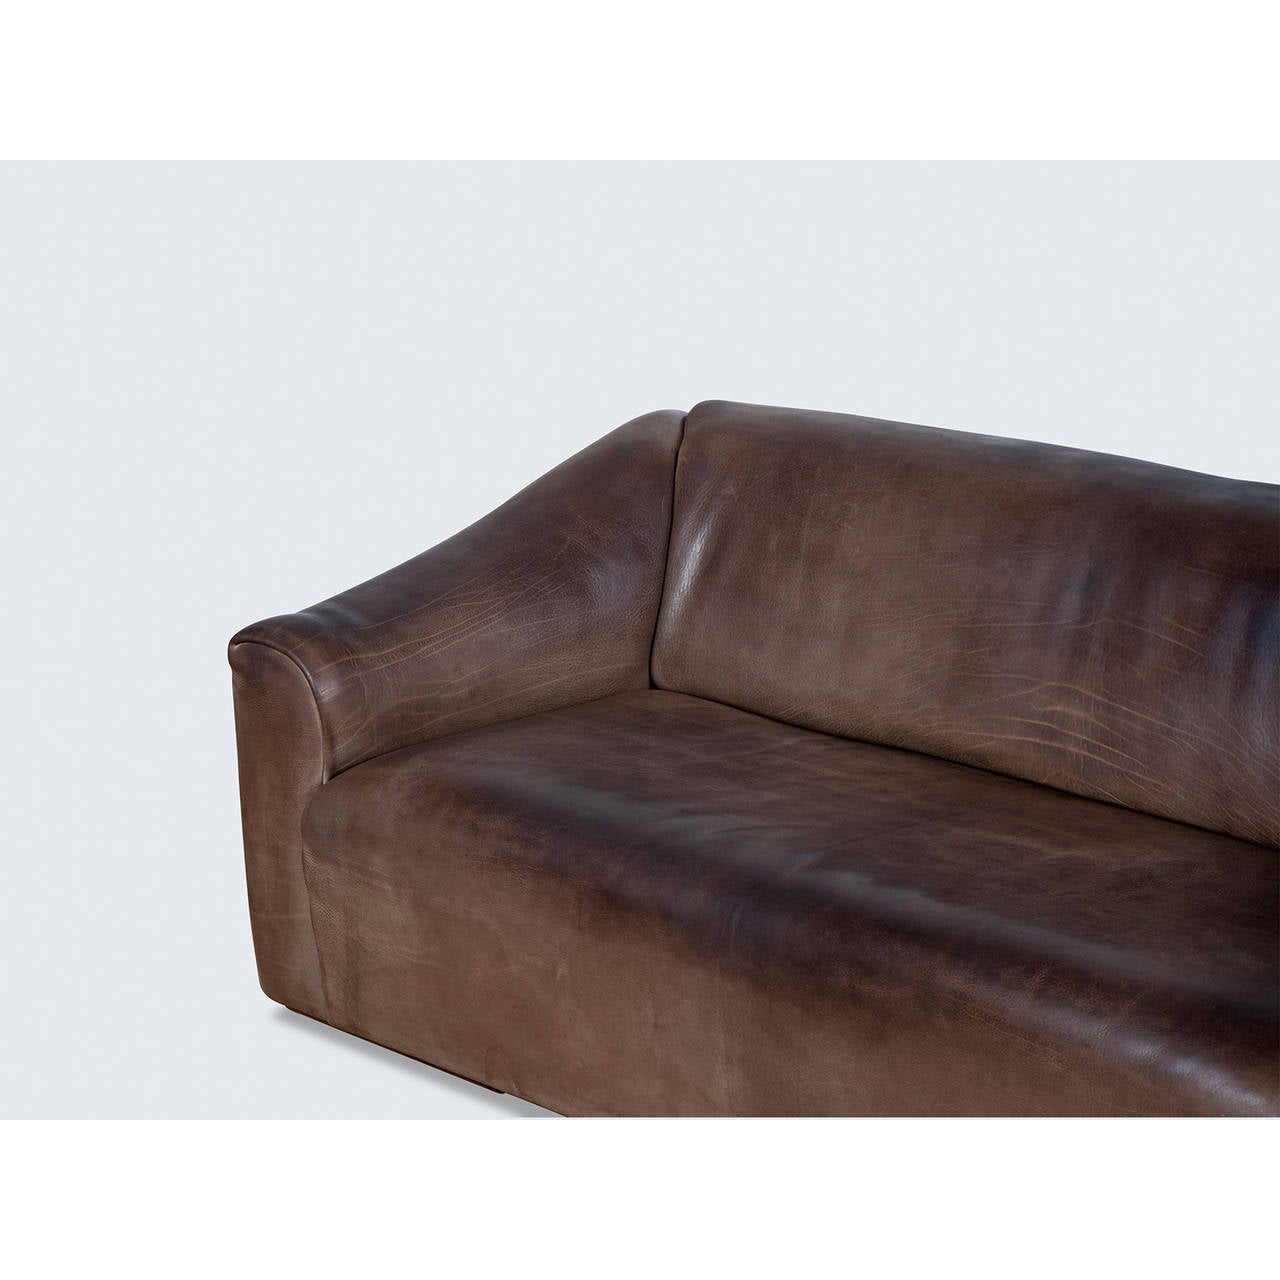 Swiss 1970's Brown Leather DS47 Sofa by De Sede For Sale